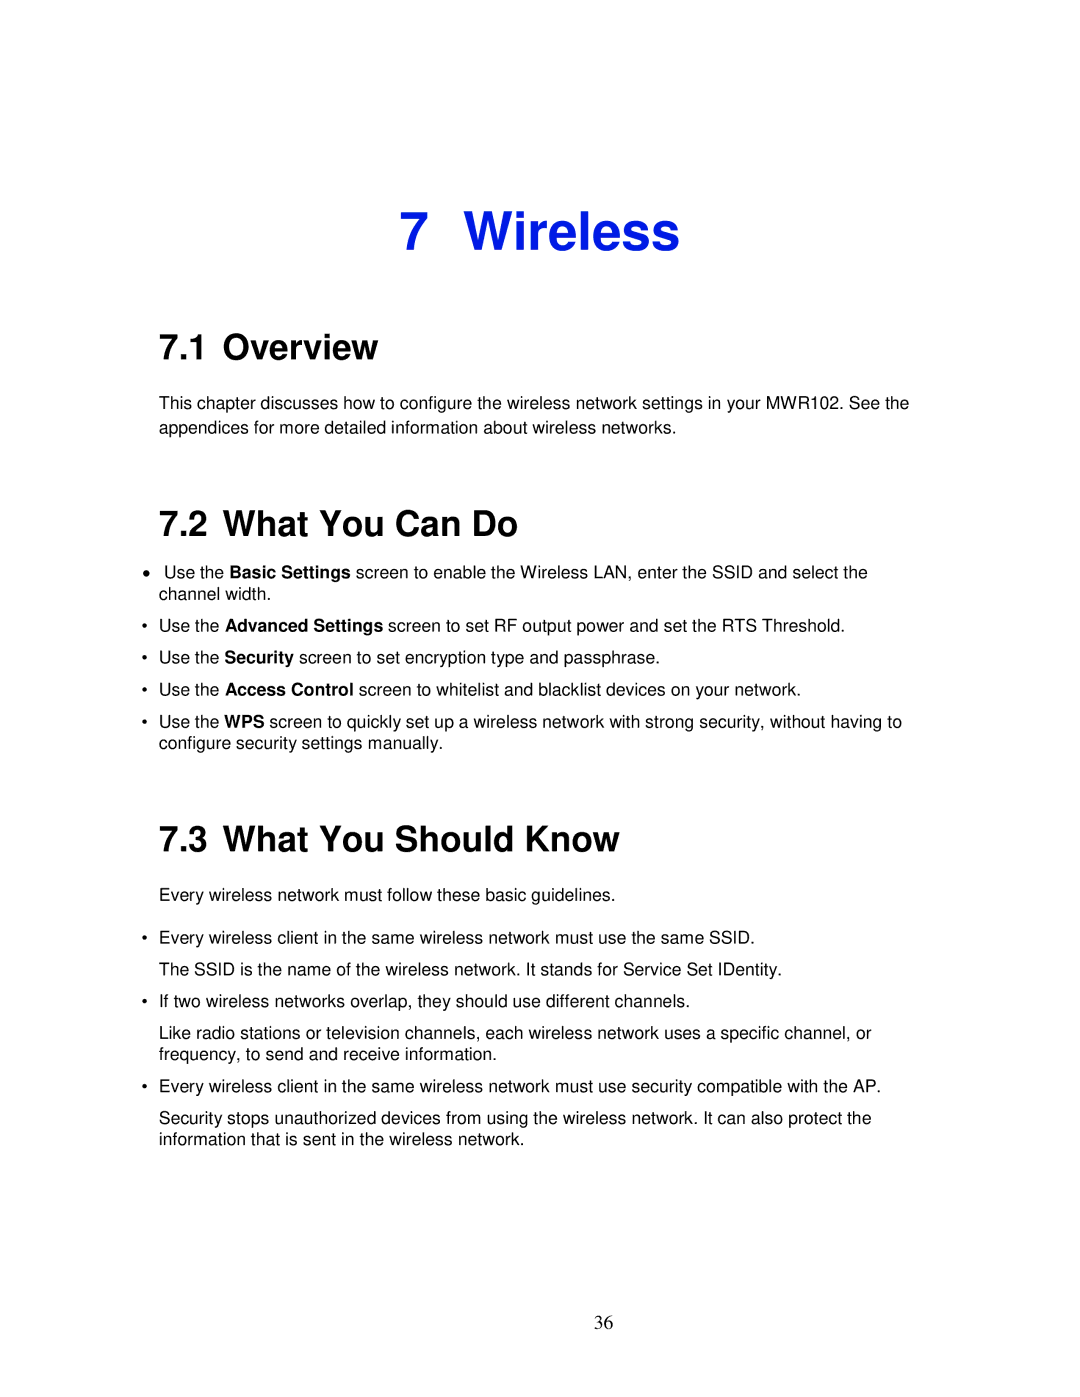 ZyXEL Communications MWR102 manual Wireless, What You Should Know 